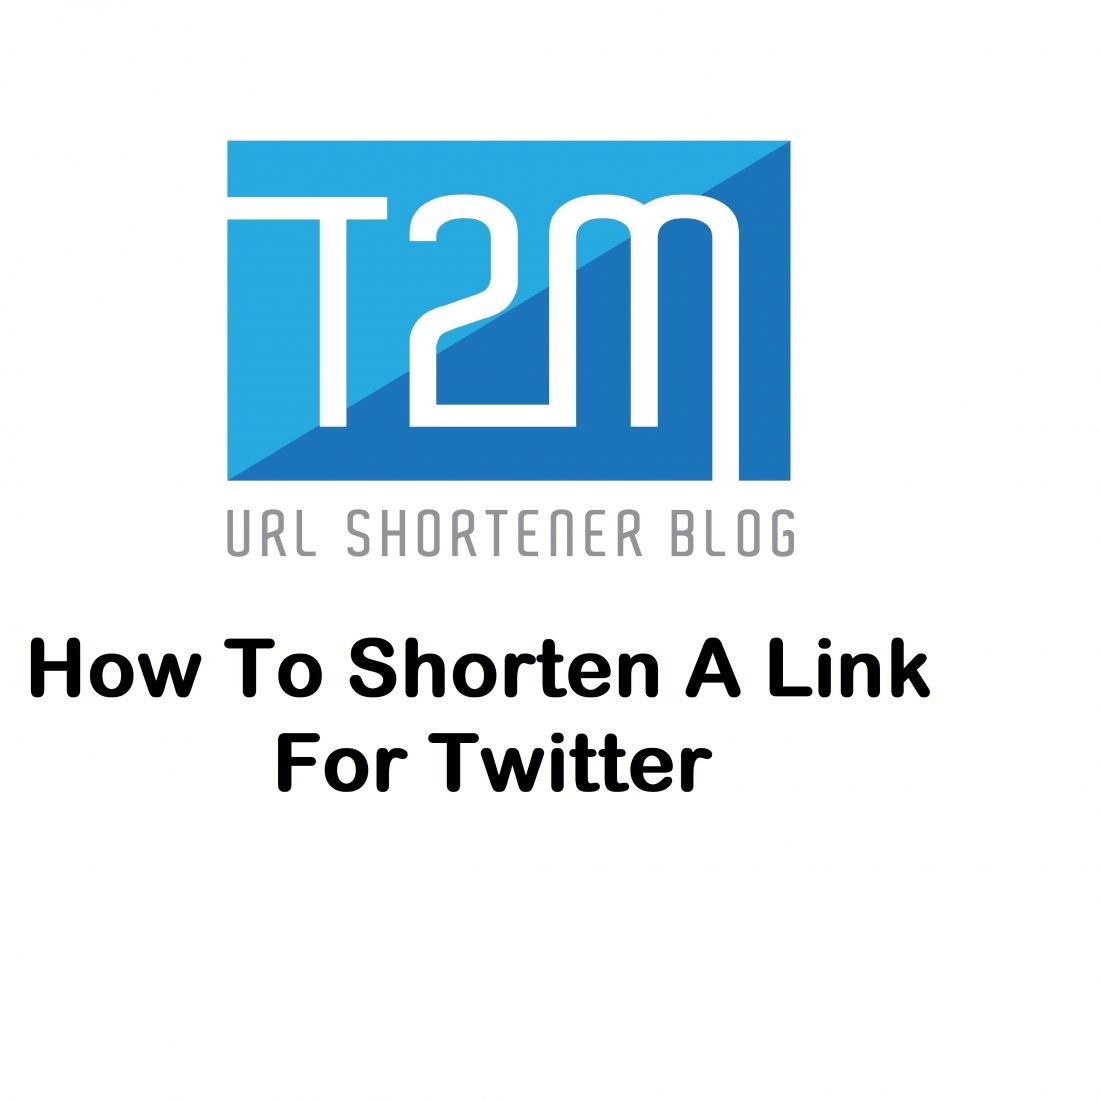 How To Shorten A Link For Twitter?